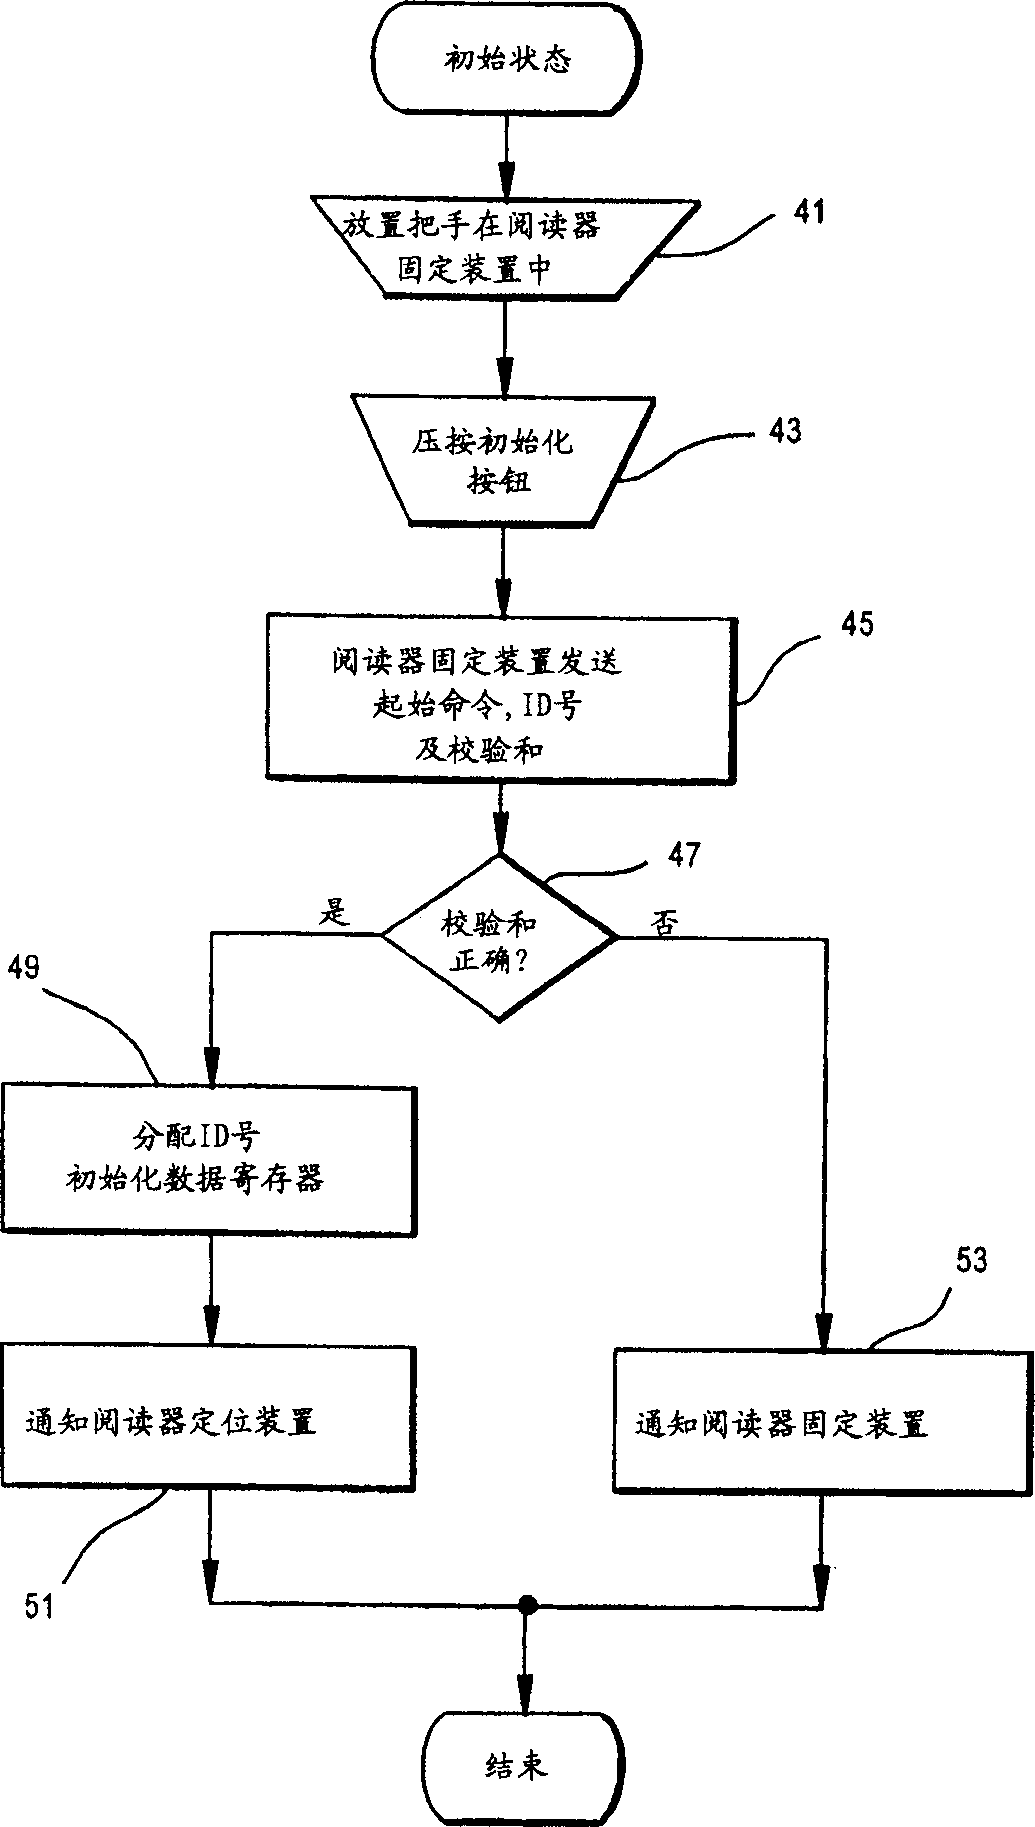 System for communicating operational data between electric toothbrush and separate control unit